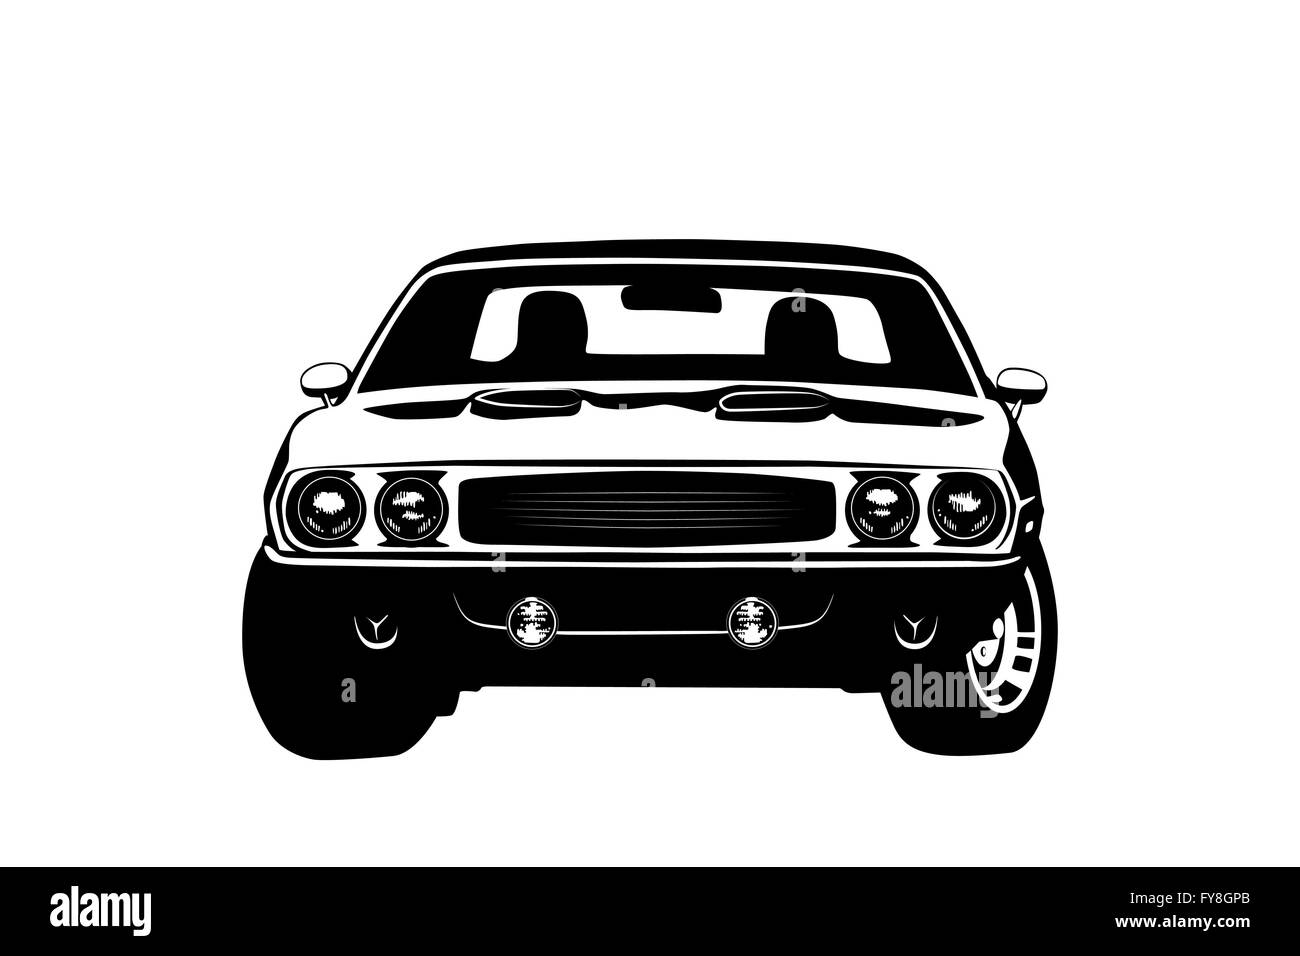 American muscle car legend silhouette vector illustration Stock Vector